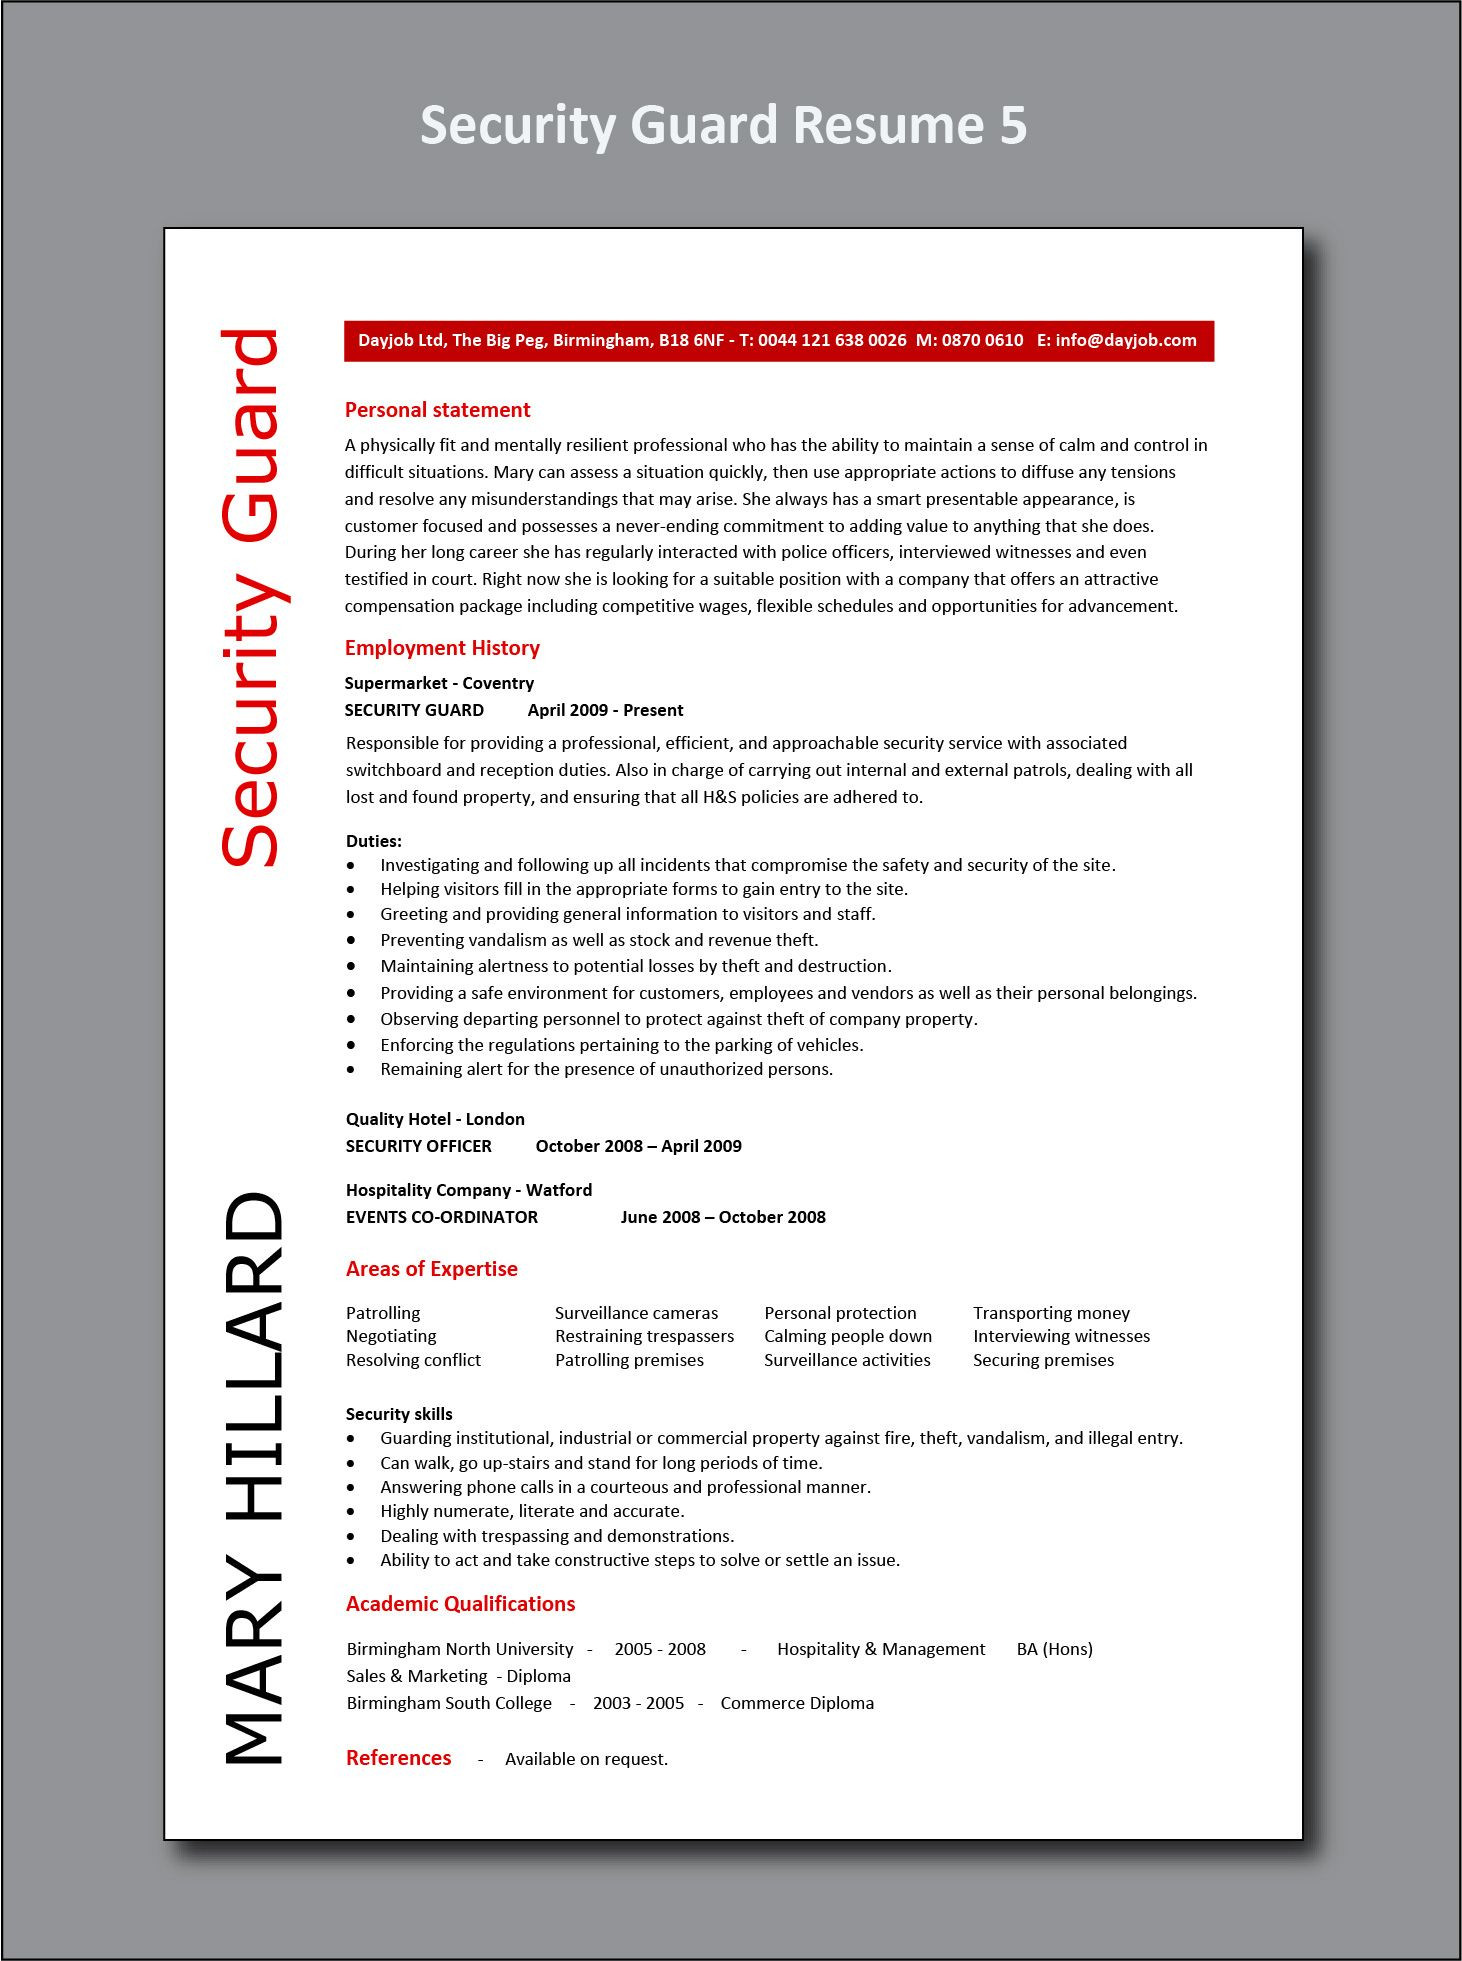 Security Guard Resume Sample without Experience Security Guard Resume 5 Example Operations Management, Resume …